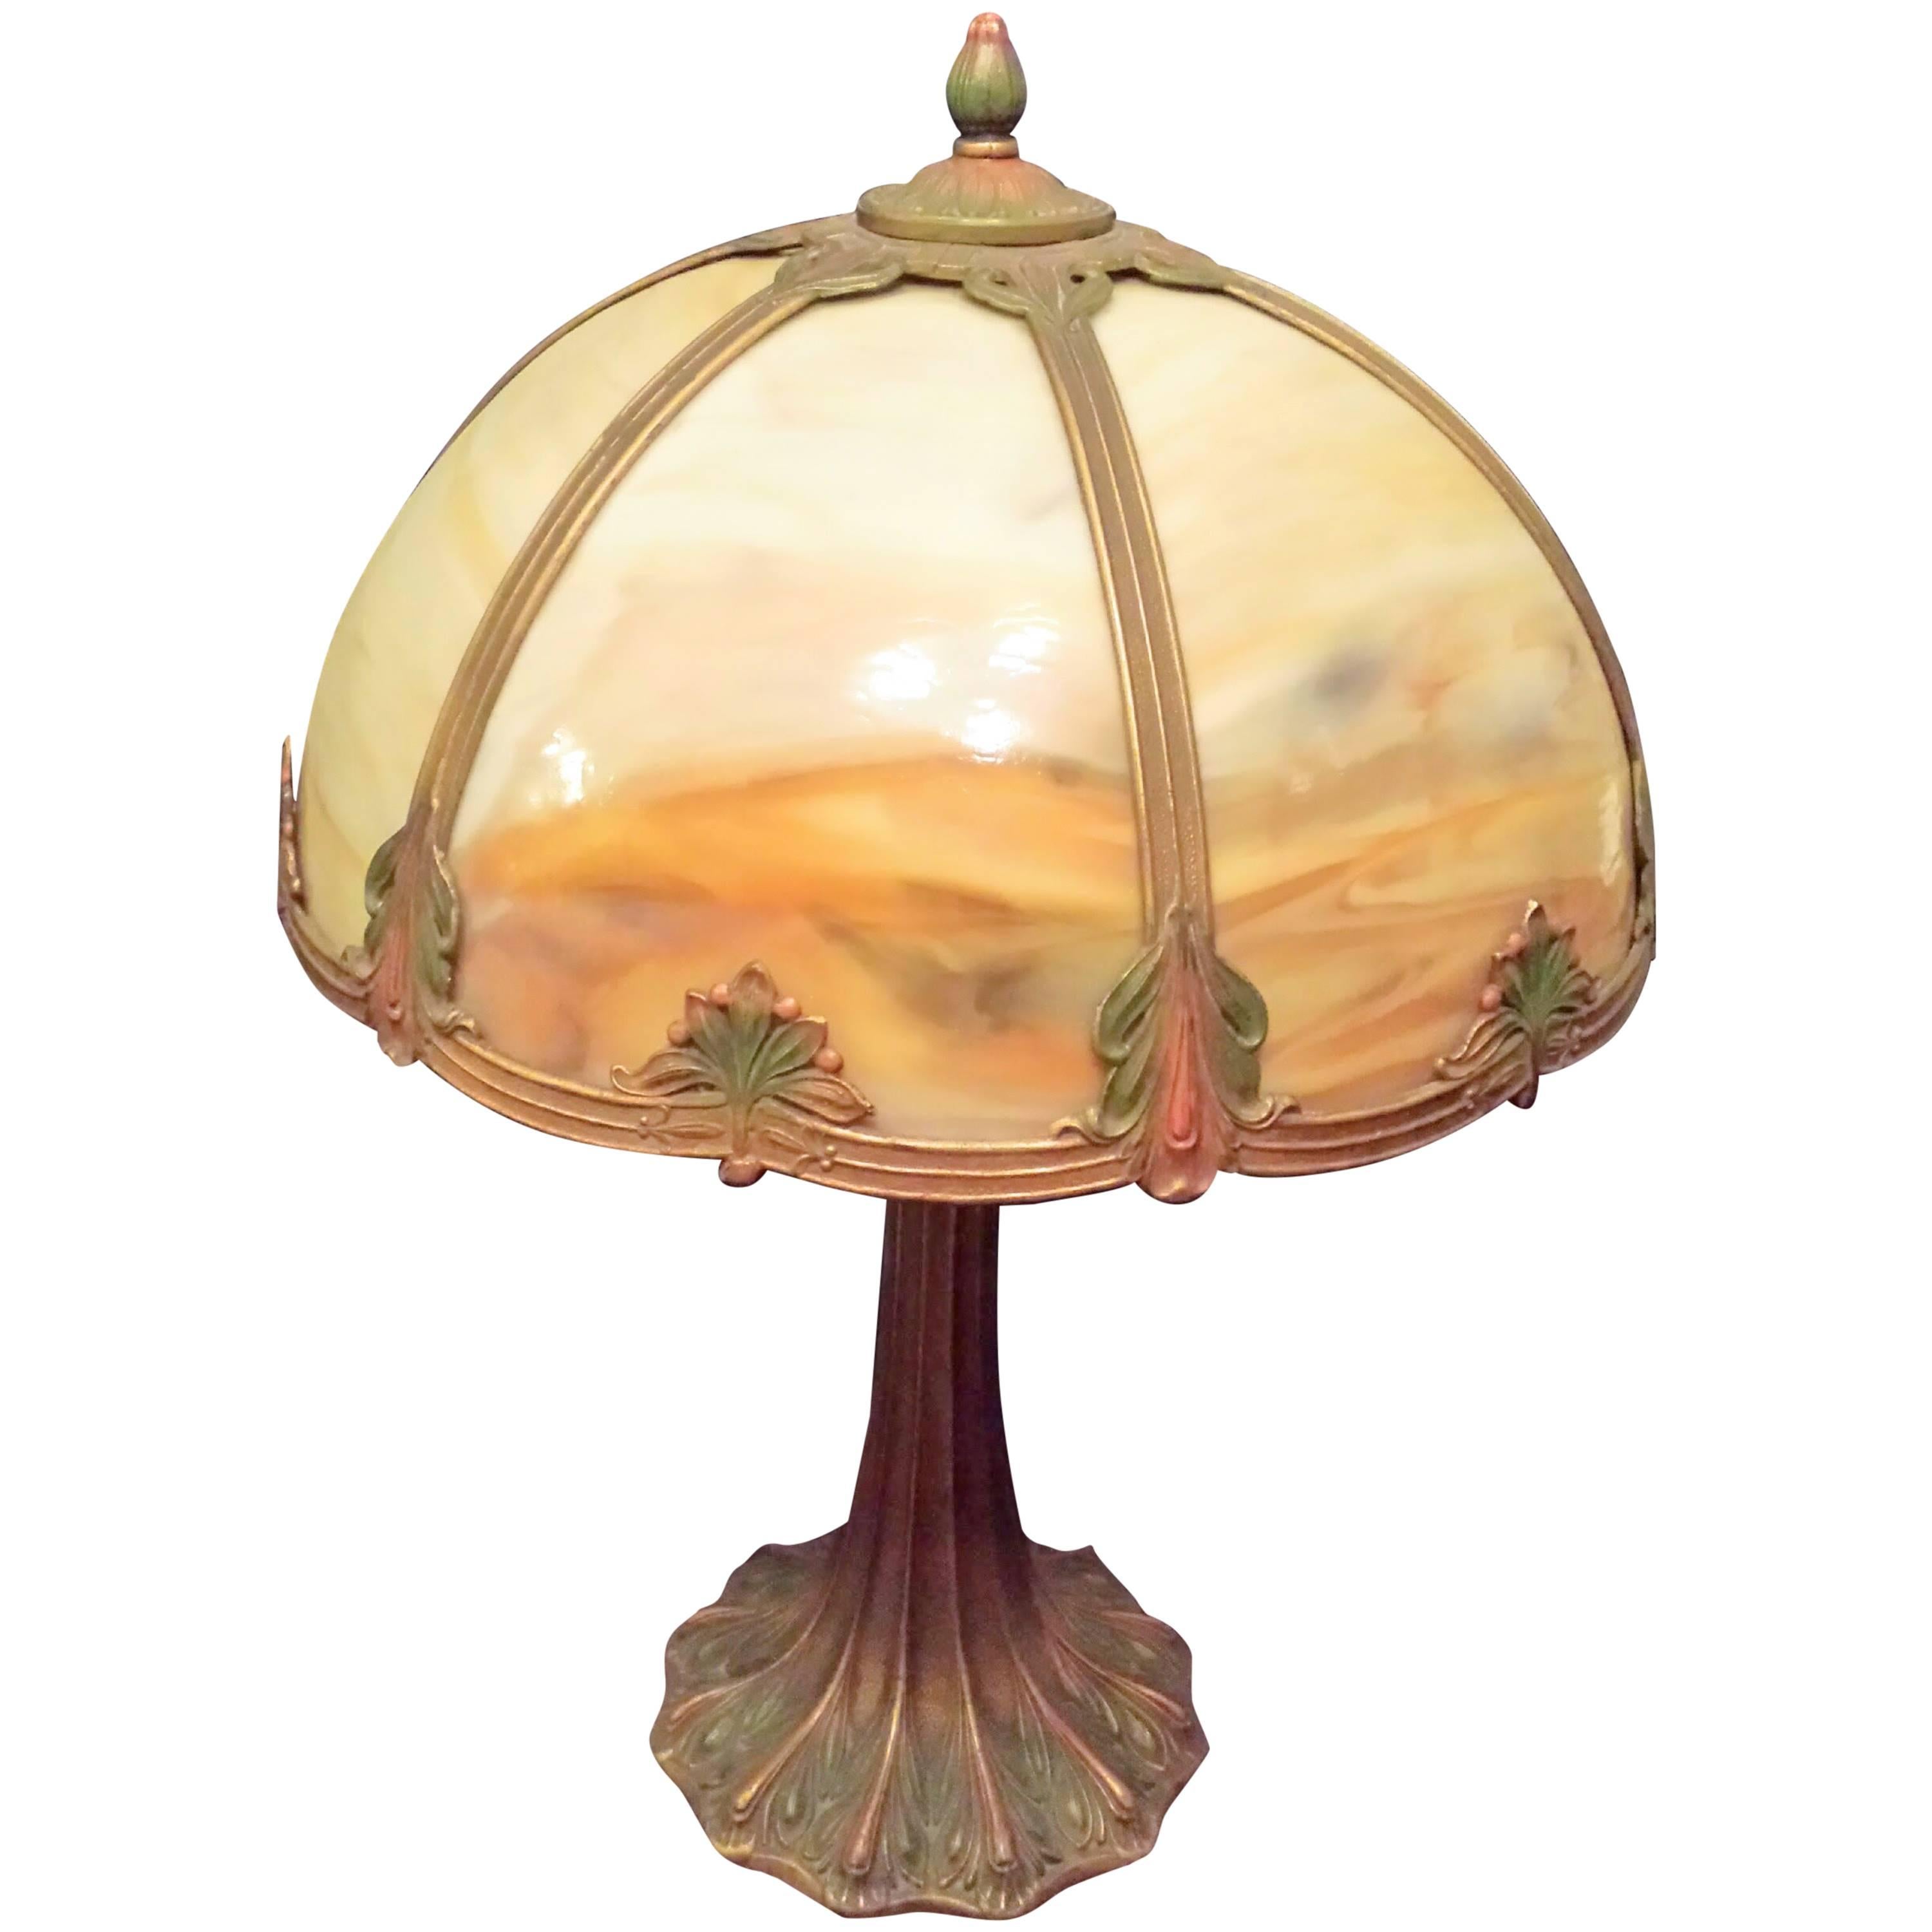 Slag Glass Table Lamp, Carmel Colored Glass with a Decorated Shade and Base